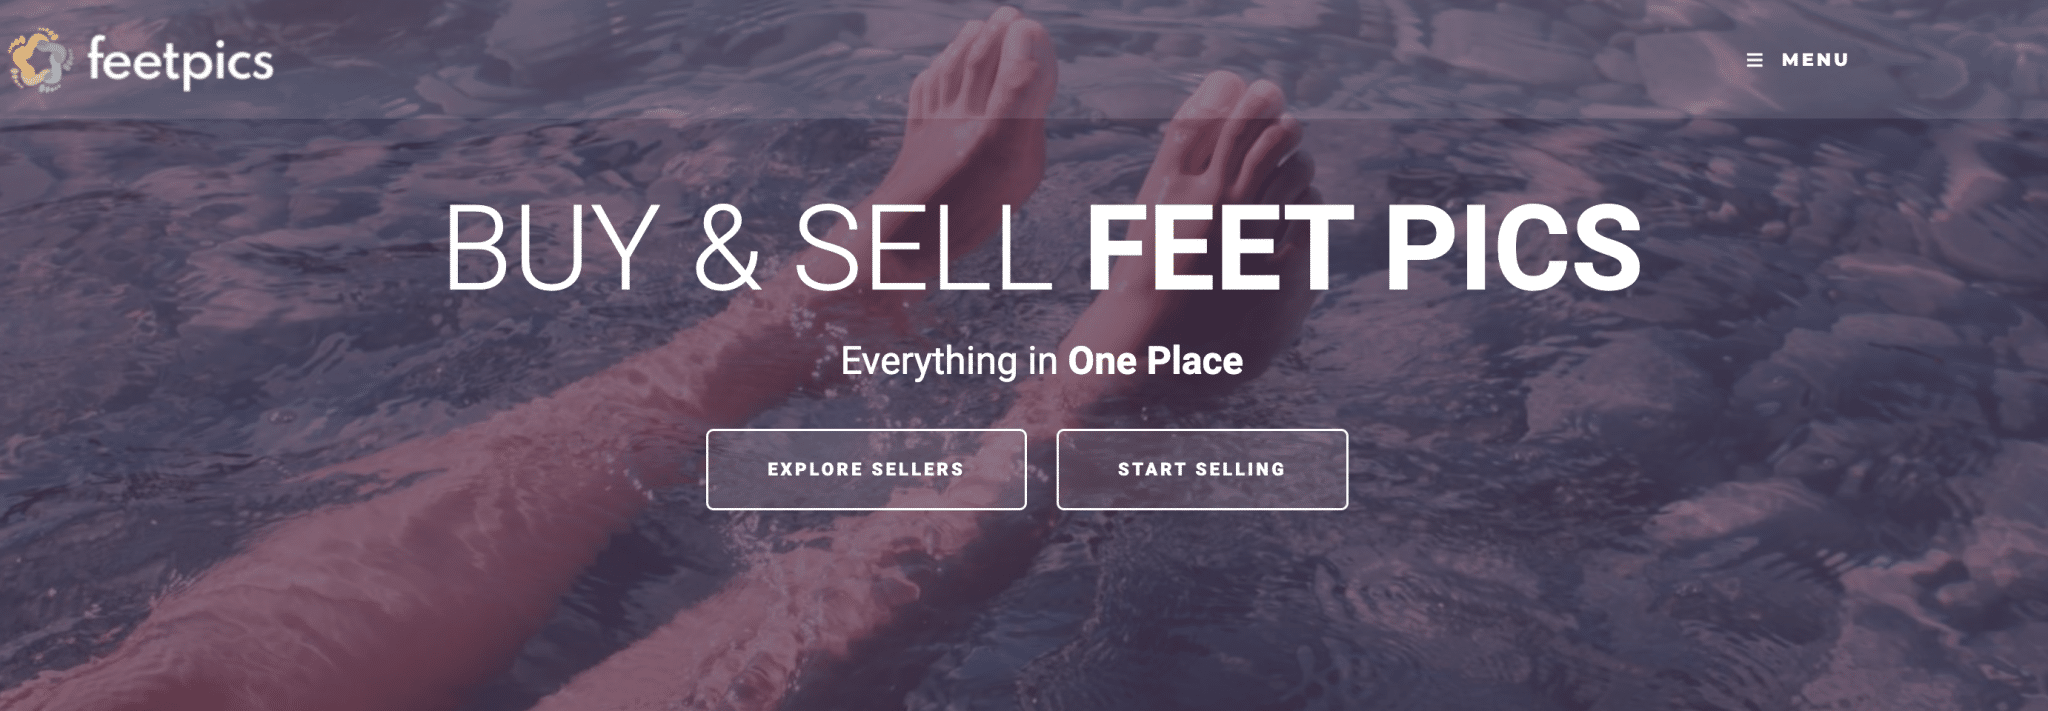 In one place you can buy or sell quality foot photos